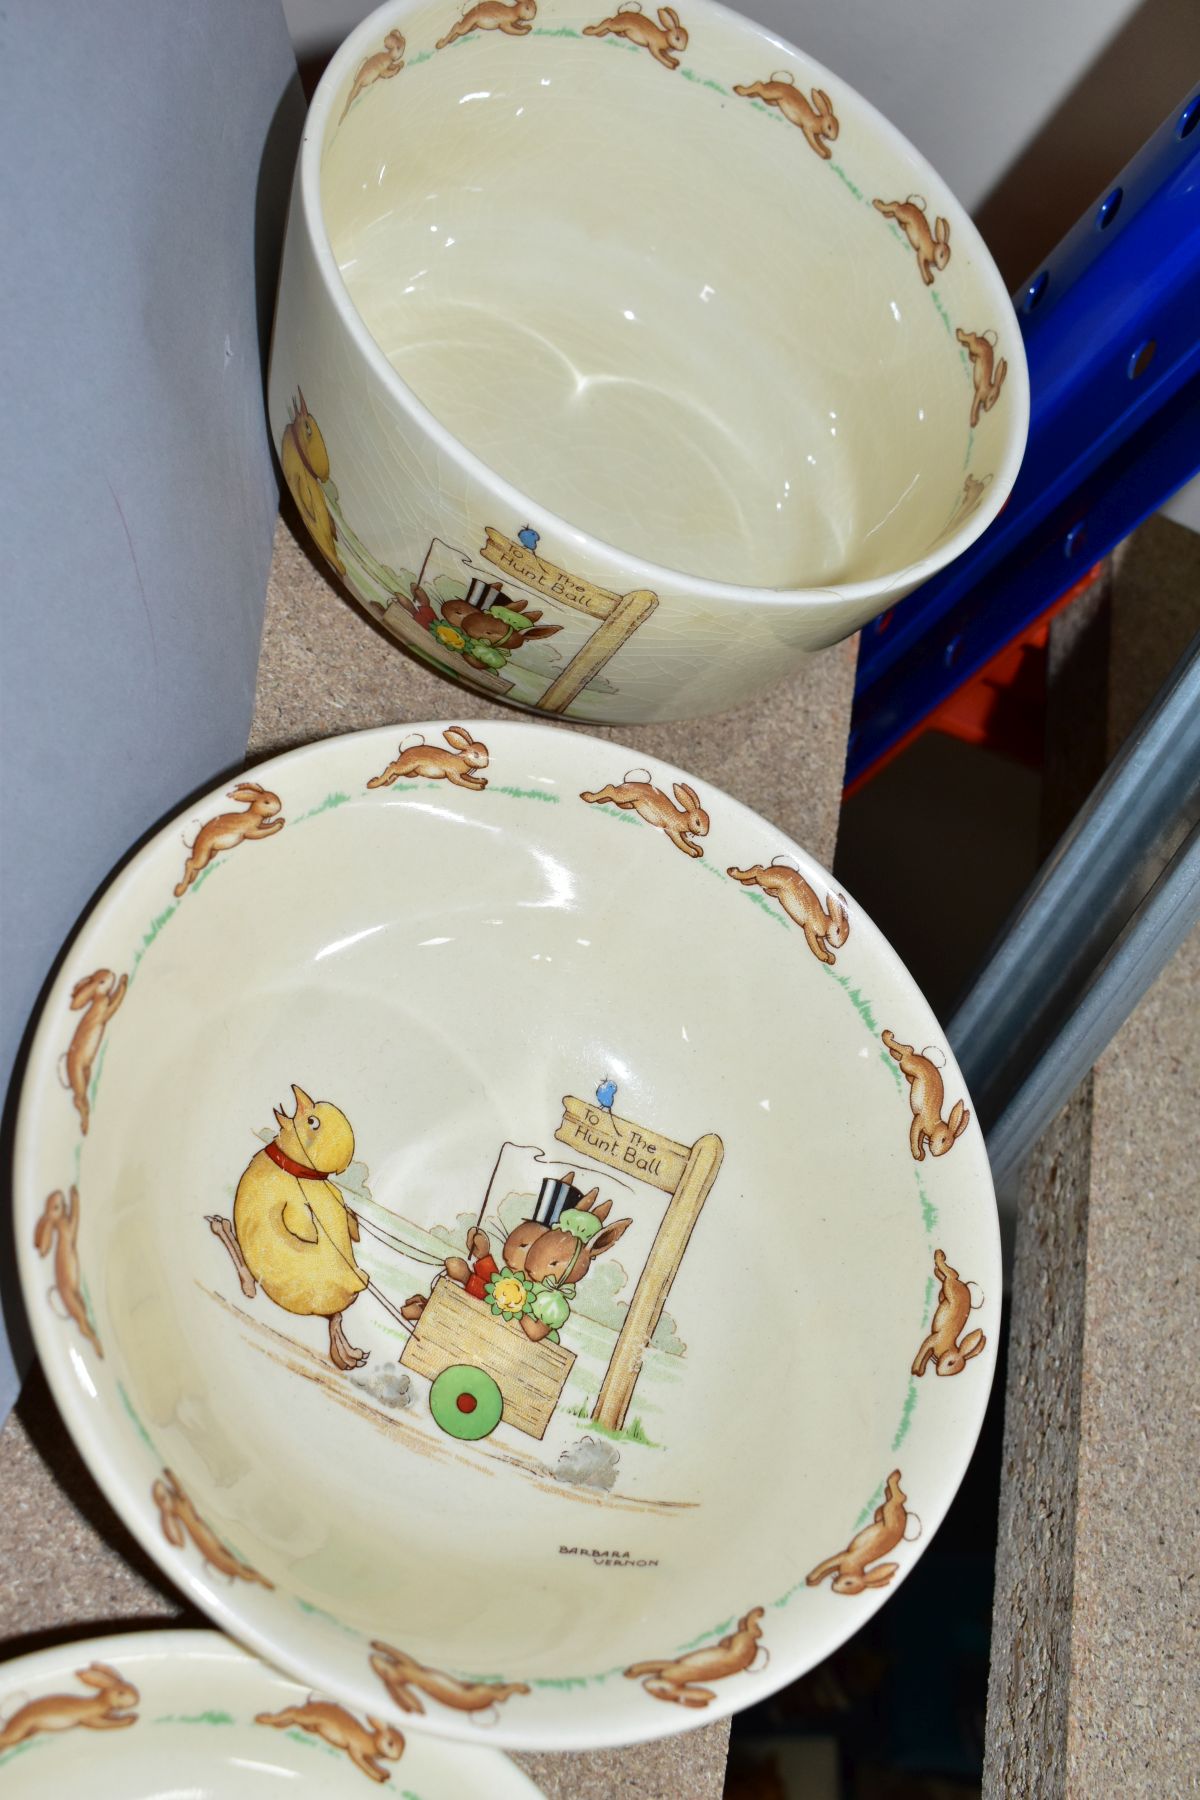 SIX PIECES OF ROYAL DOULTON BUNNYKINS EARTHENWARE TABLES WARES OF CHICKEN PULLING CART, DESIGNED - Image 4 of 10